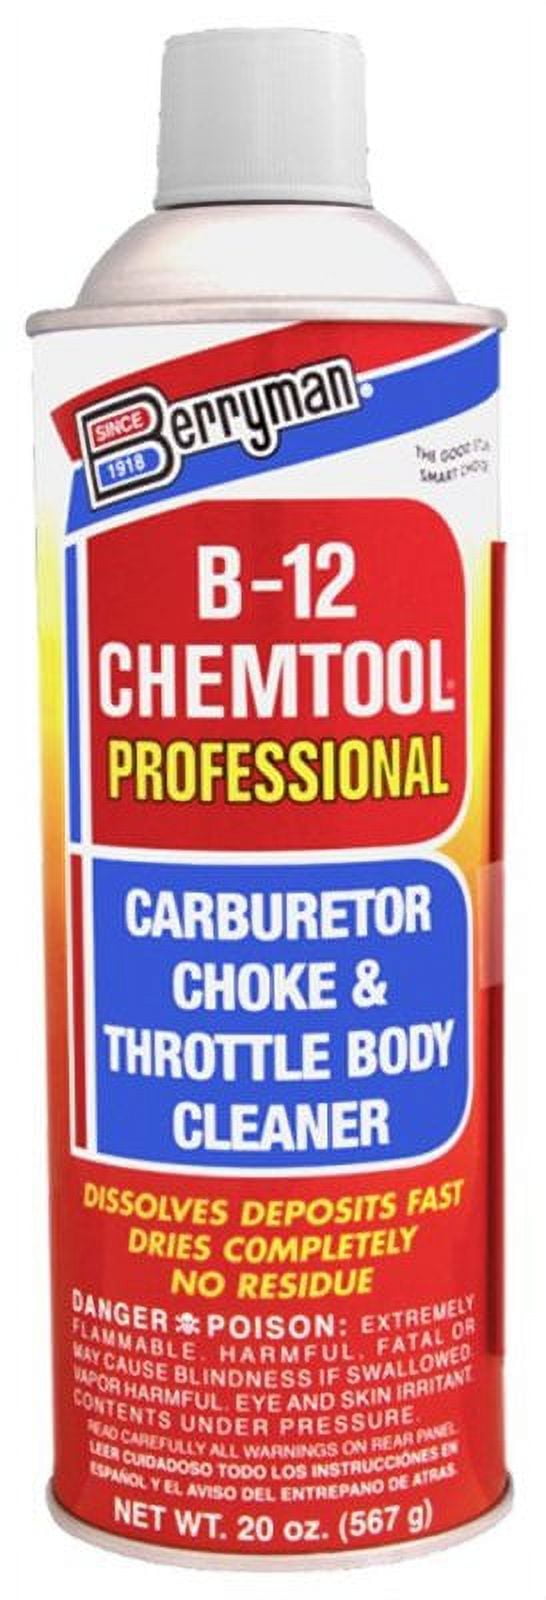 Berryman B-12 Chemtool 15 Ounce Fuel System Cleaner 0116